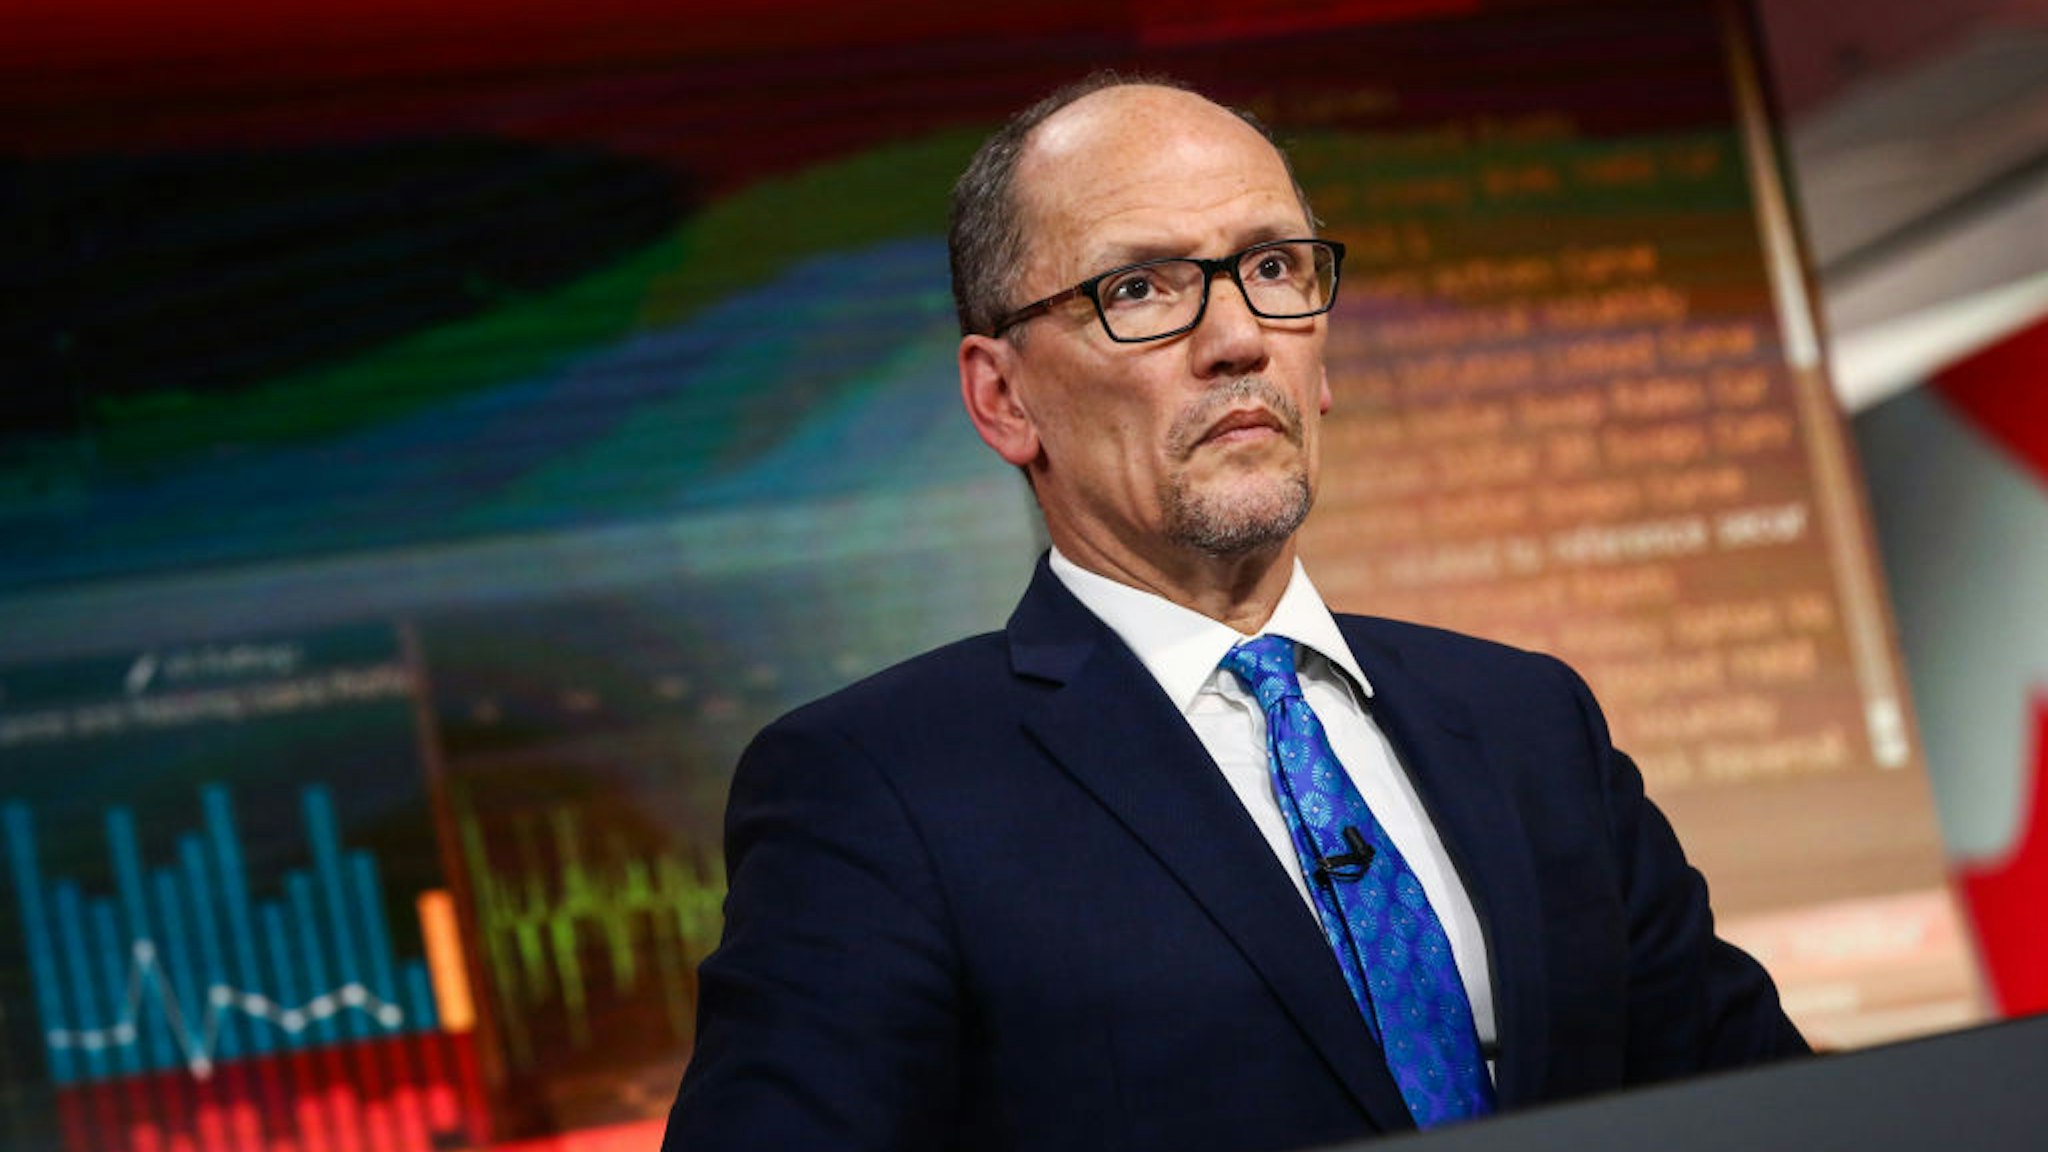 Tom Perez, chairman of the Democratic National Committee, listens during a Bloomberg Television interview in New York, U.S., on Wednesday, Jan. 31, 2018. Perez said U.S. President Donald Trump's immigration proposals will hurt the economy.